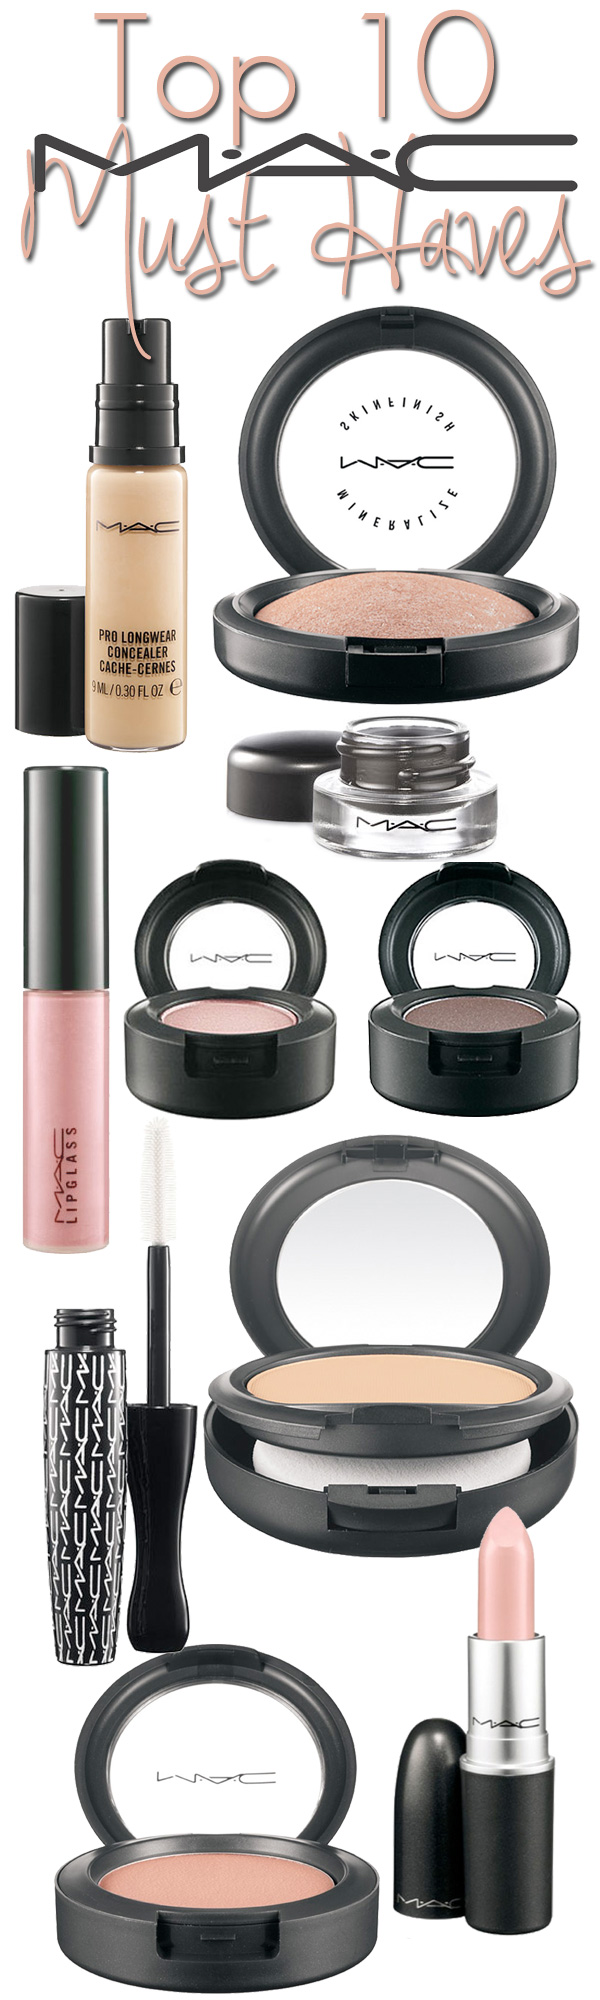 Top 10 Mac Cosmetics Must Haves